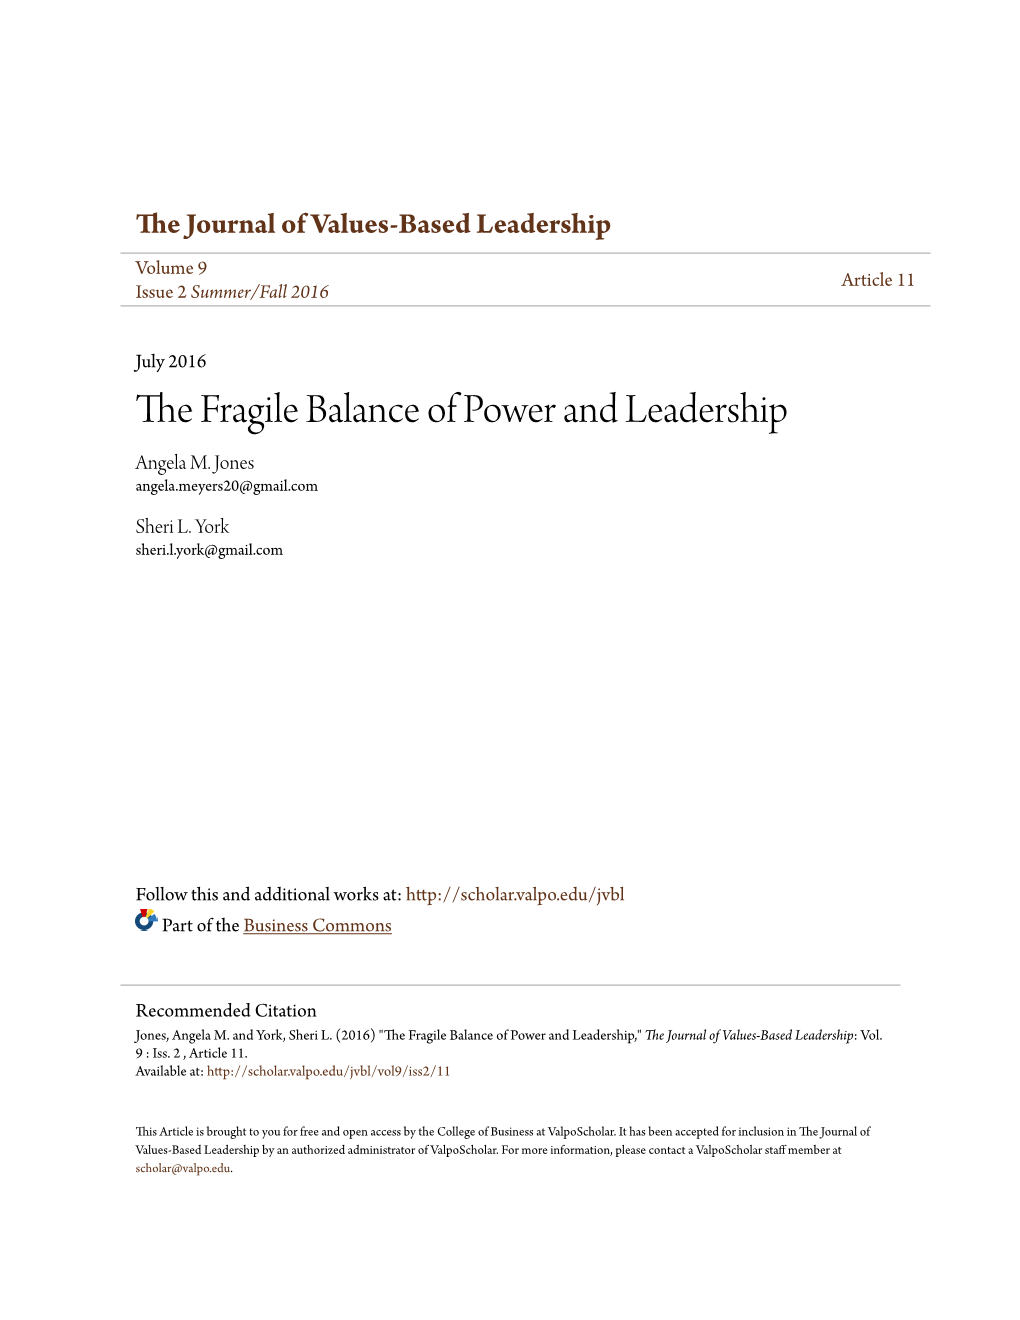 The Fragile Balance of Power and Leadership